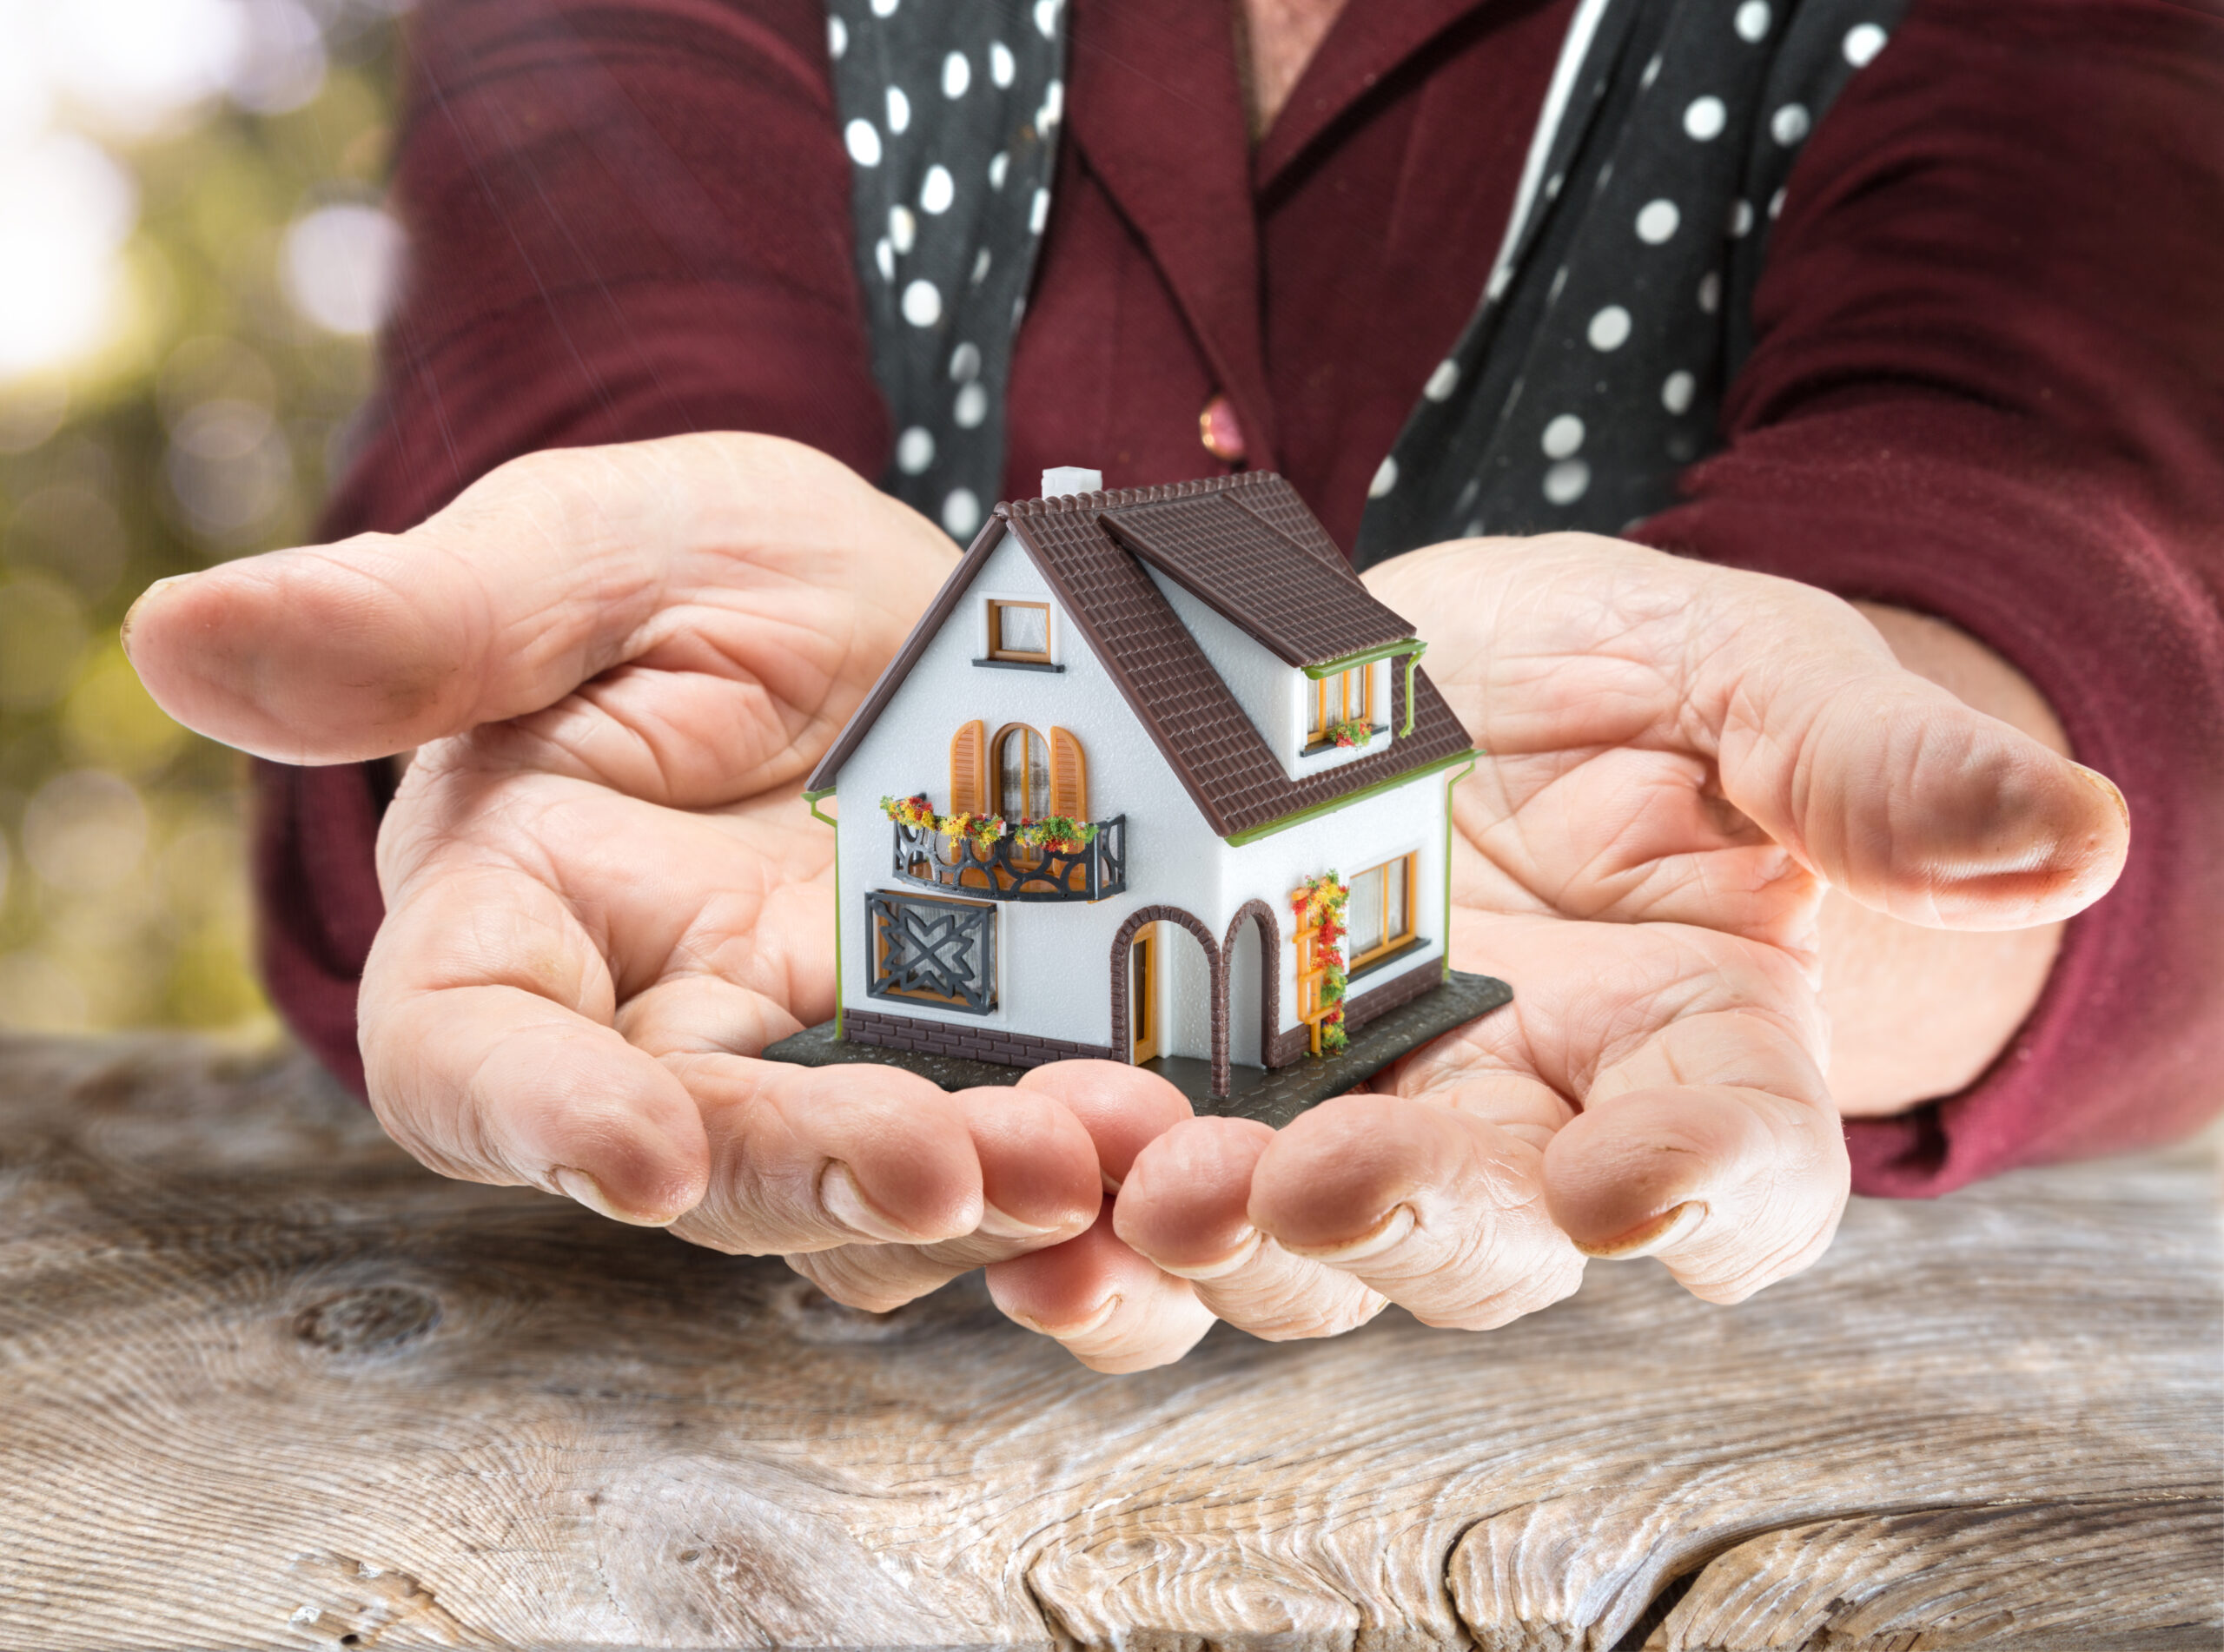 Options to consider when inheriting a house